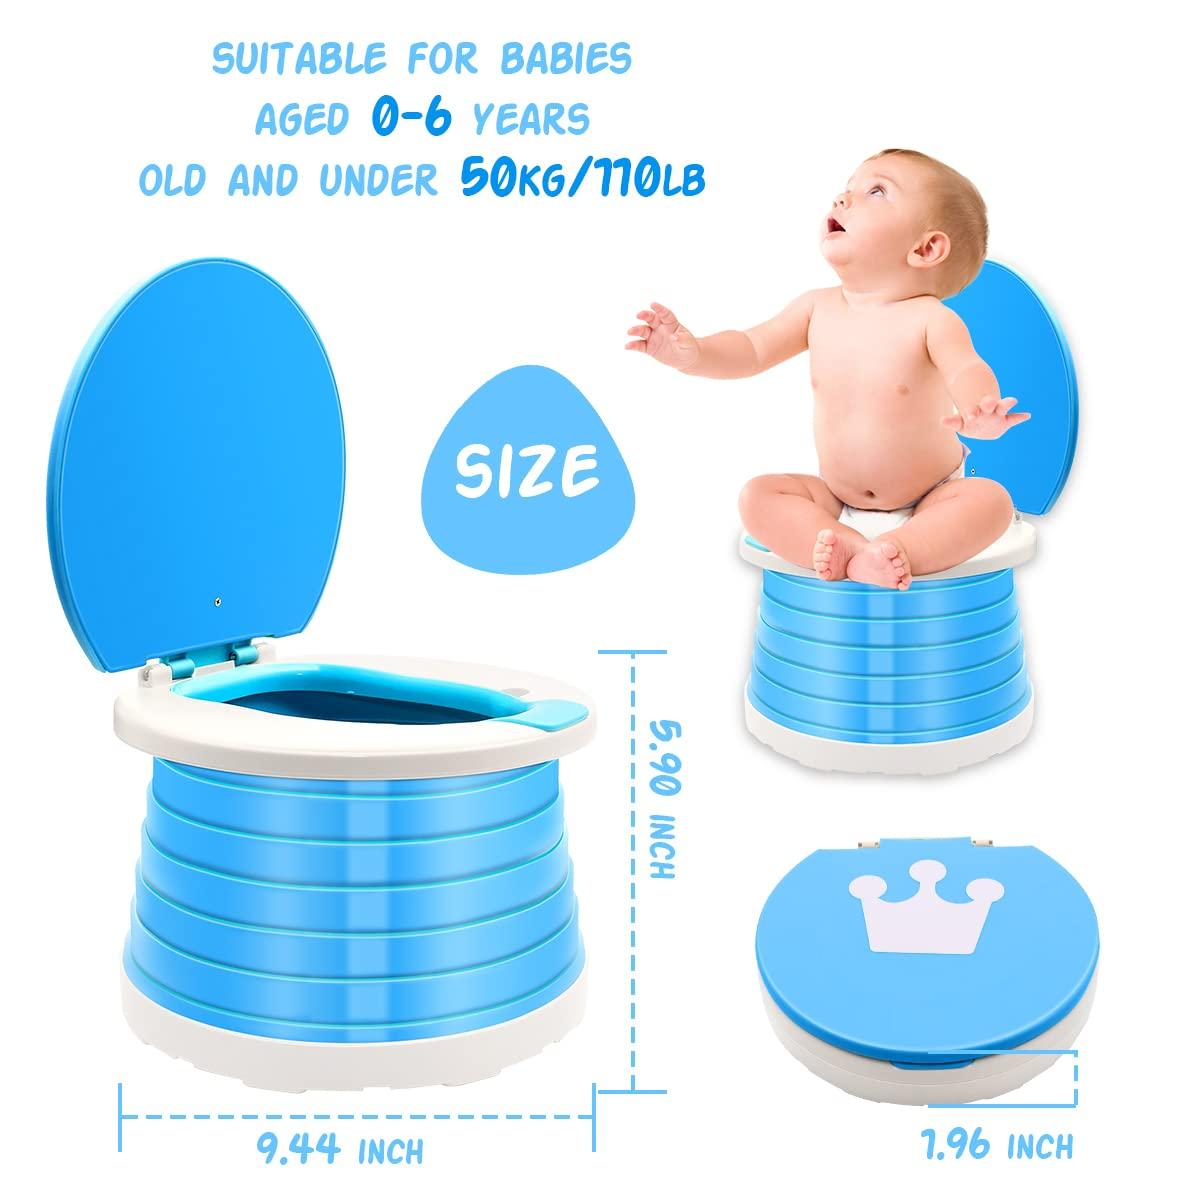 Portable Potty for Toddler Travel Foldable Training Toilet Travel Potty for  Toddler Baby Kids Potty Chair Seat Indoor and Outdoor (Blue Potty)